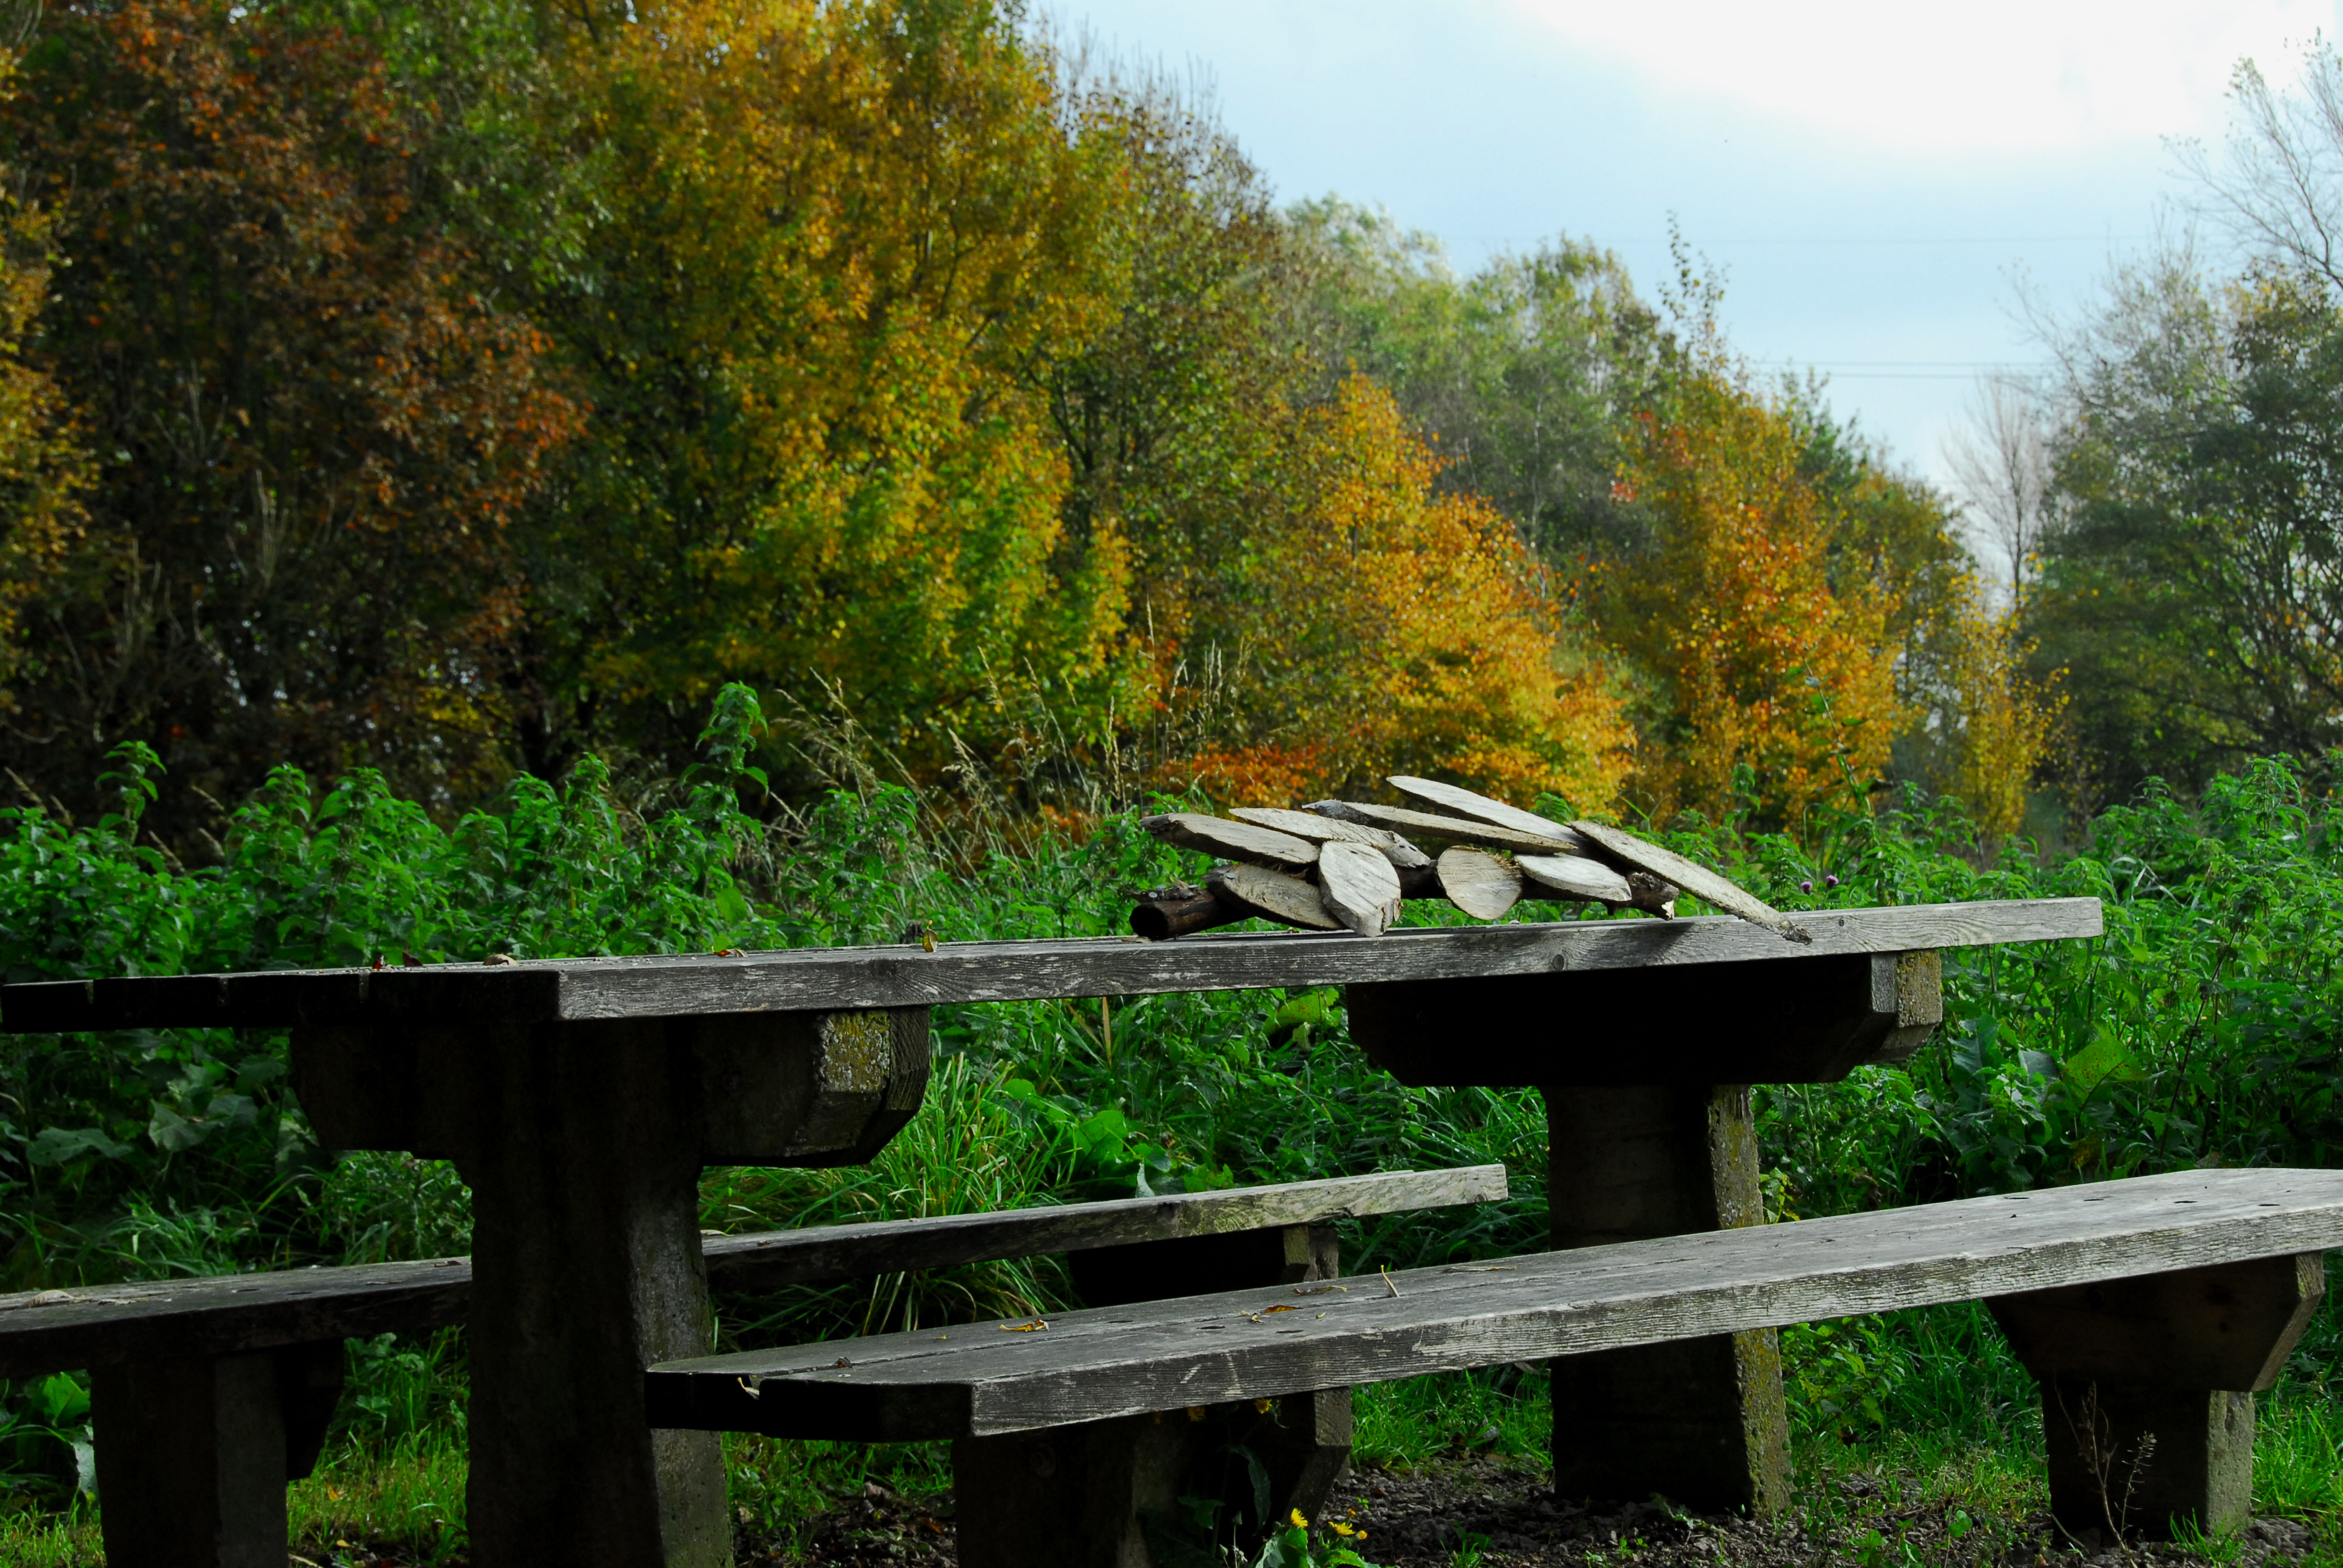 Wooden bench at Wyre Estuary Country Park with autumn trees around it.